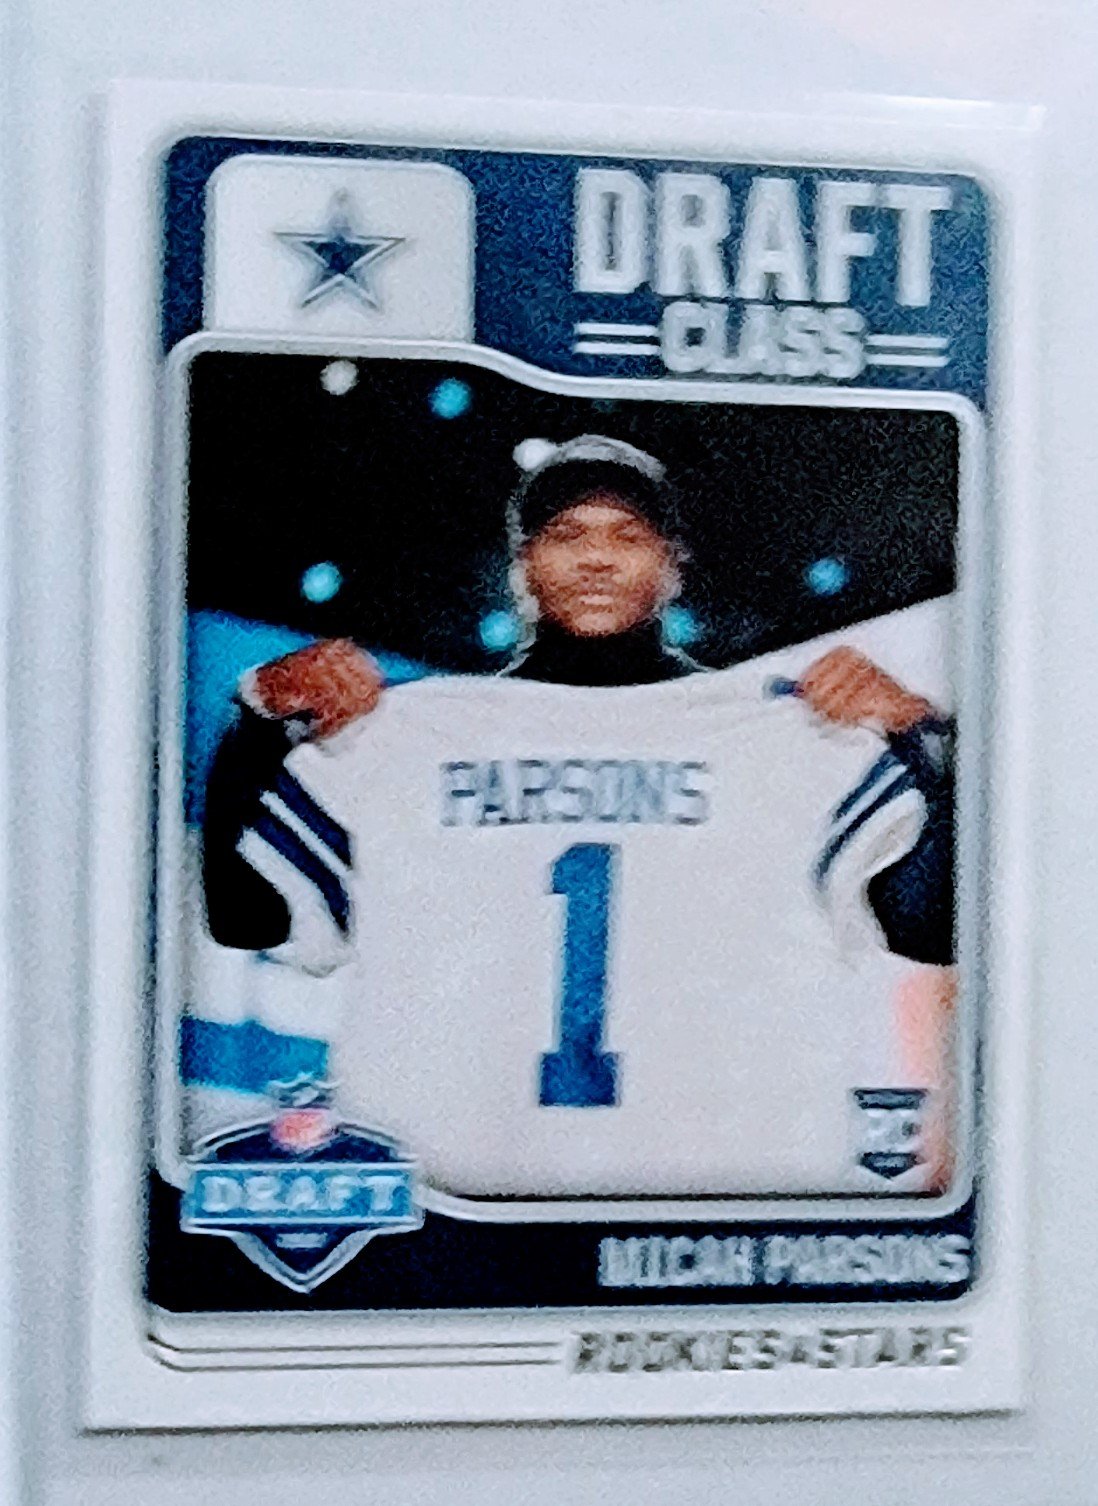 2021 Panini Rookies and Stars Mica Parsons Draft Class Rookie Football Card AVM1 simple Xclusive Collectibles   